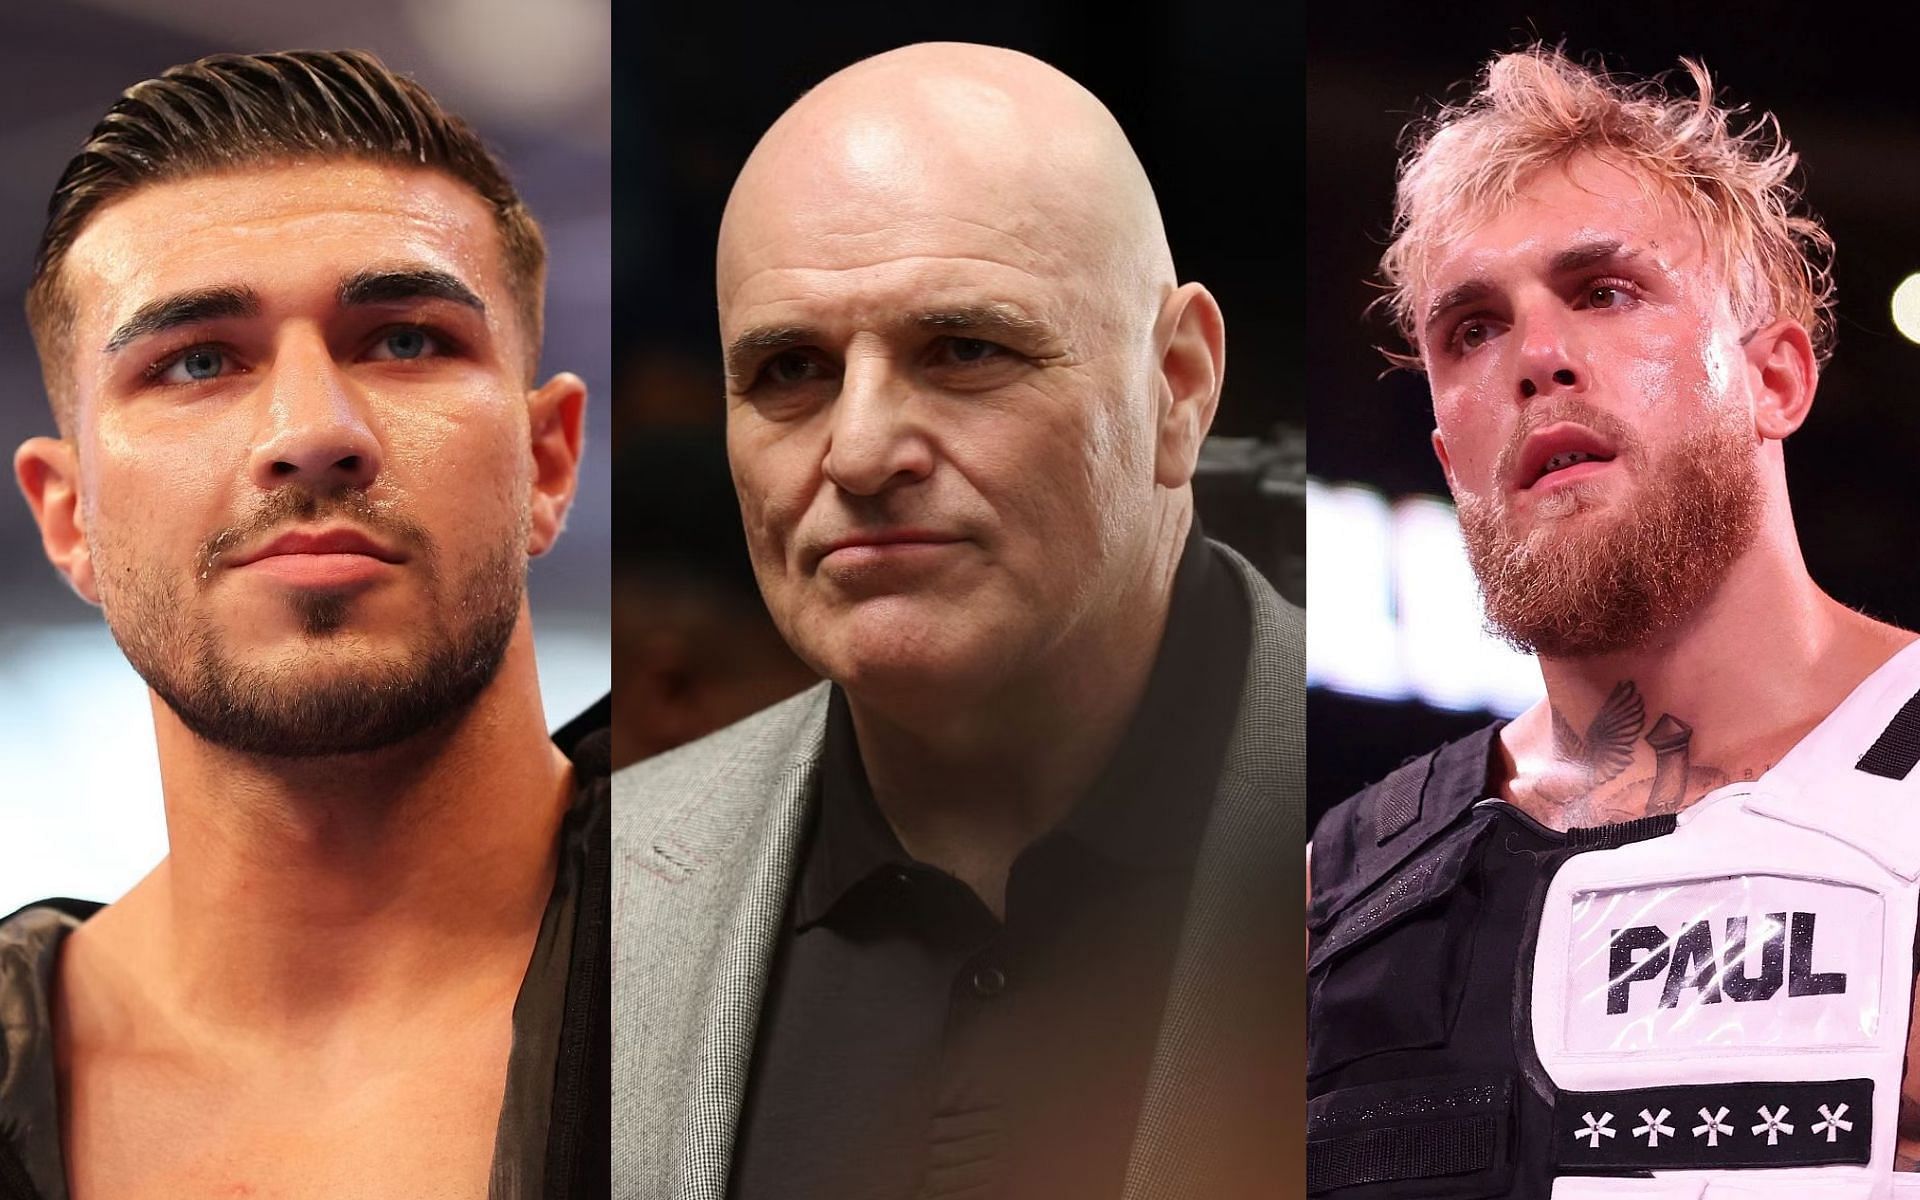 Tommy Fury (left), John Fury (middle) and Jake Paul (right)